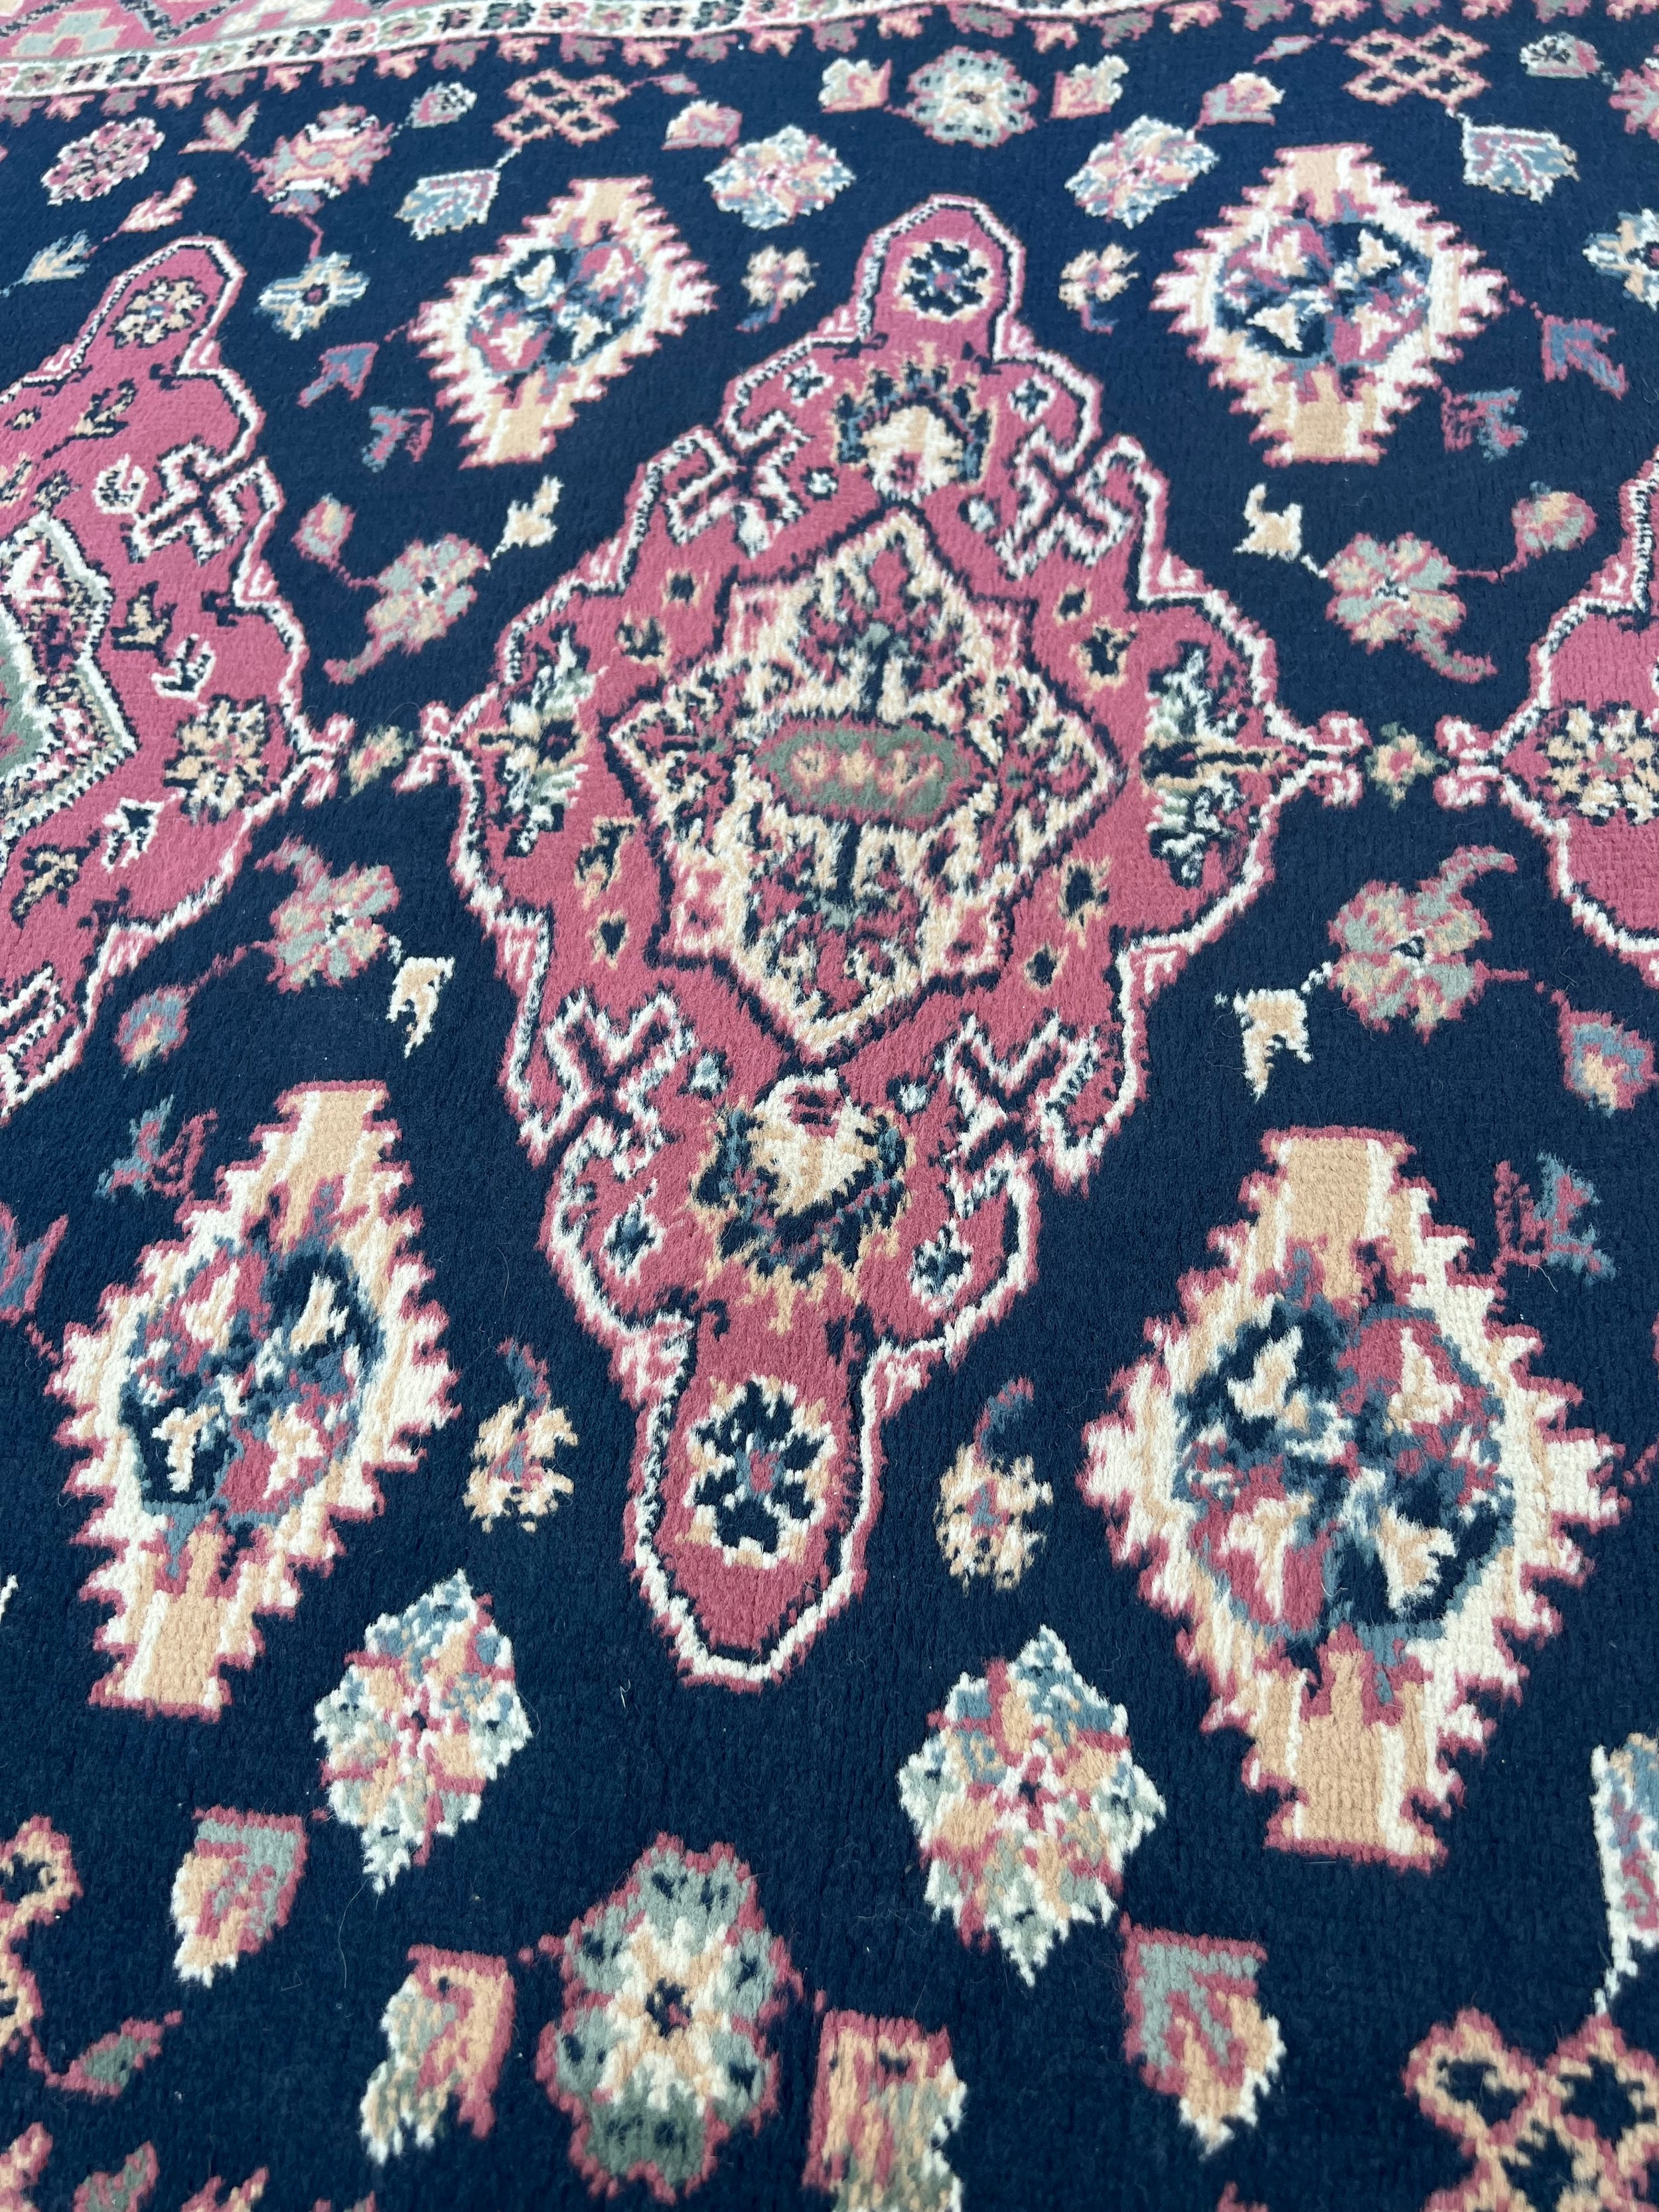 A vintage hand knotted blue/pink ground wool rug. 120 x 160cm. Possibly a Pakistan White Talim rug. - Image 3 of 4